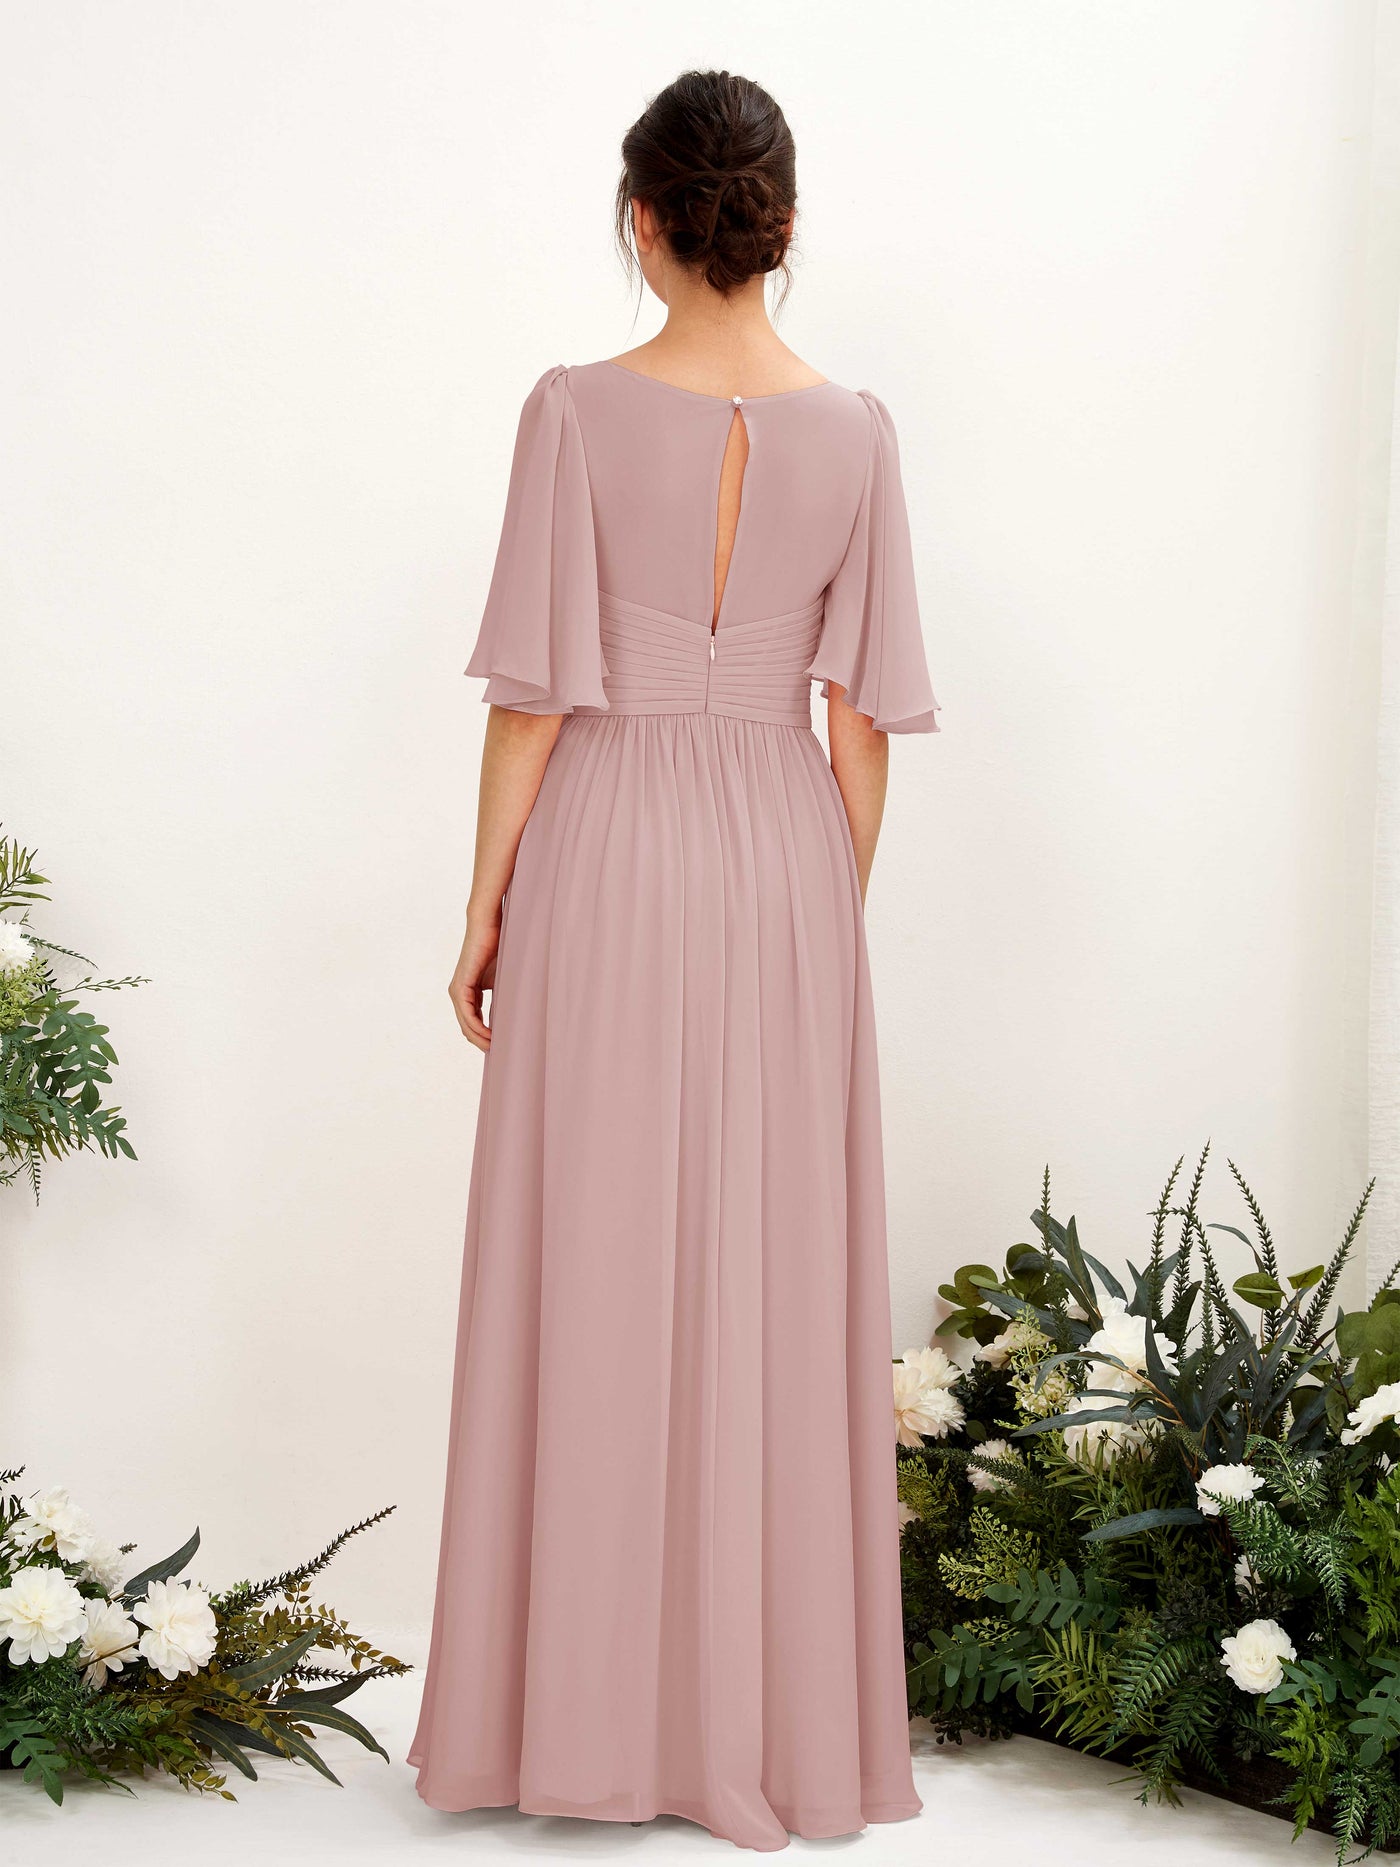 Dusty Rose Bridesmaid Dresses Bridesmaid Dress A-line Chiffon V-neck Full Length 1/2 Sleeves Wedding Party Dress (81221609)#color_dusty-rose